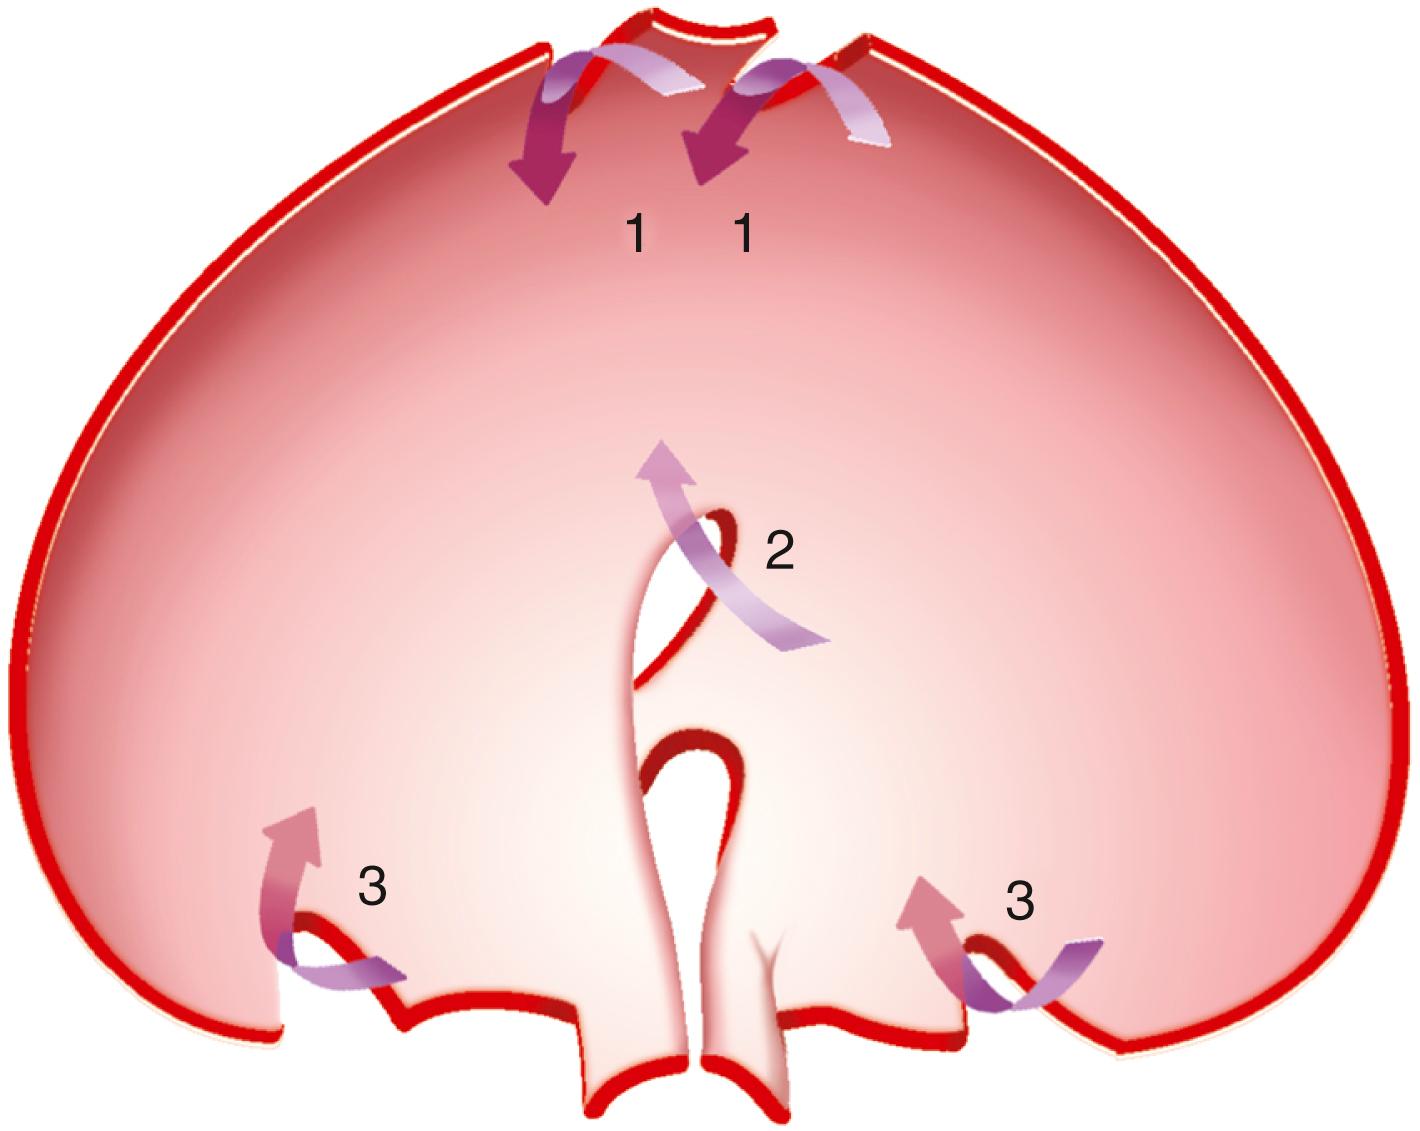 Fig. 27.2, Congenital diaphragmatic hernias. Diagram of the diaphragm viewed from below with areas of potential herniation shown. 1, Sternocostal foramina of Morgagni anteriorly. 2, Esophageal hiatus. 3, Lumbocostal foramina of Bochdalek posteriorly. Arrows indicate the direction of herniation.